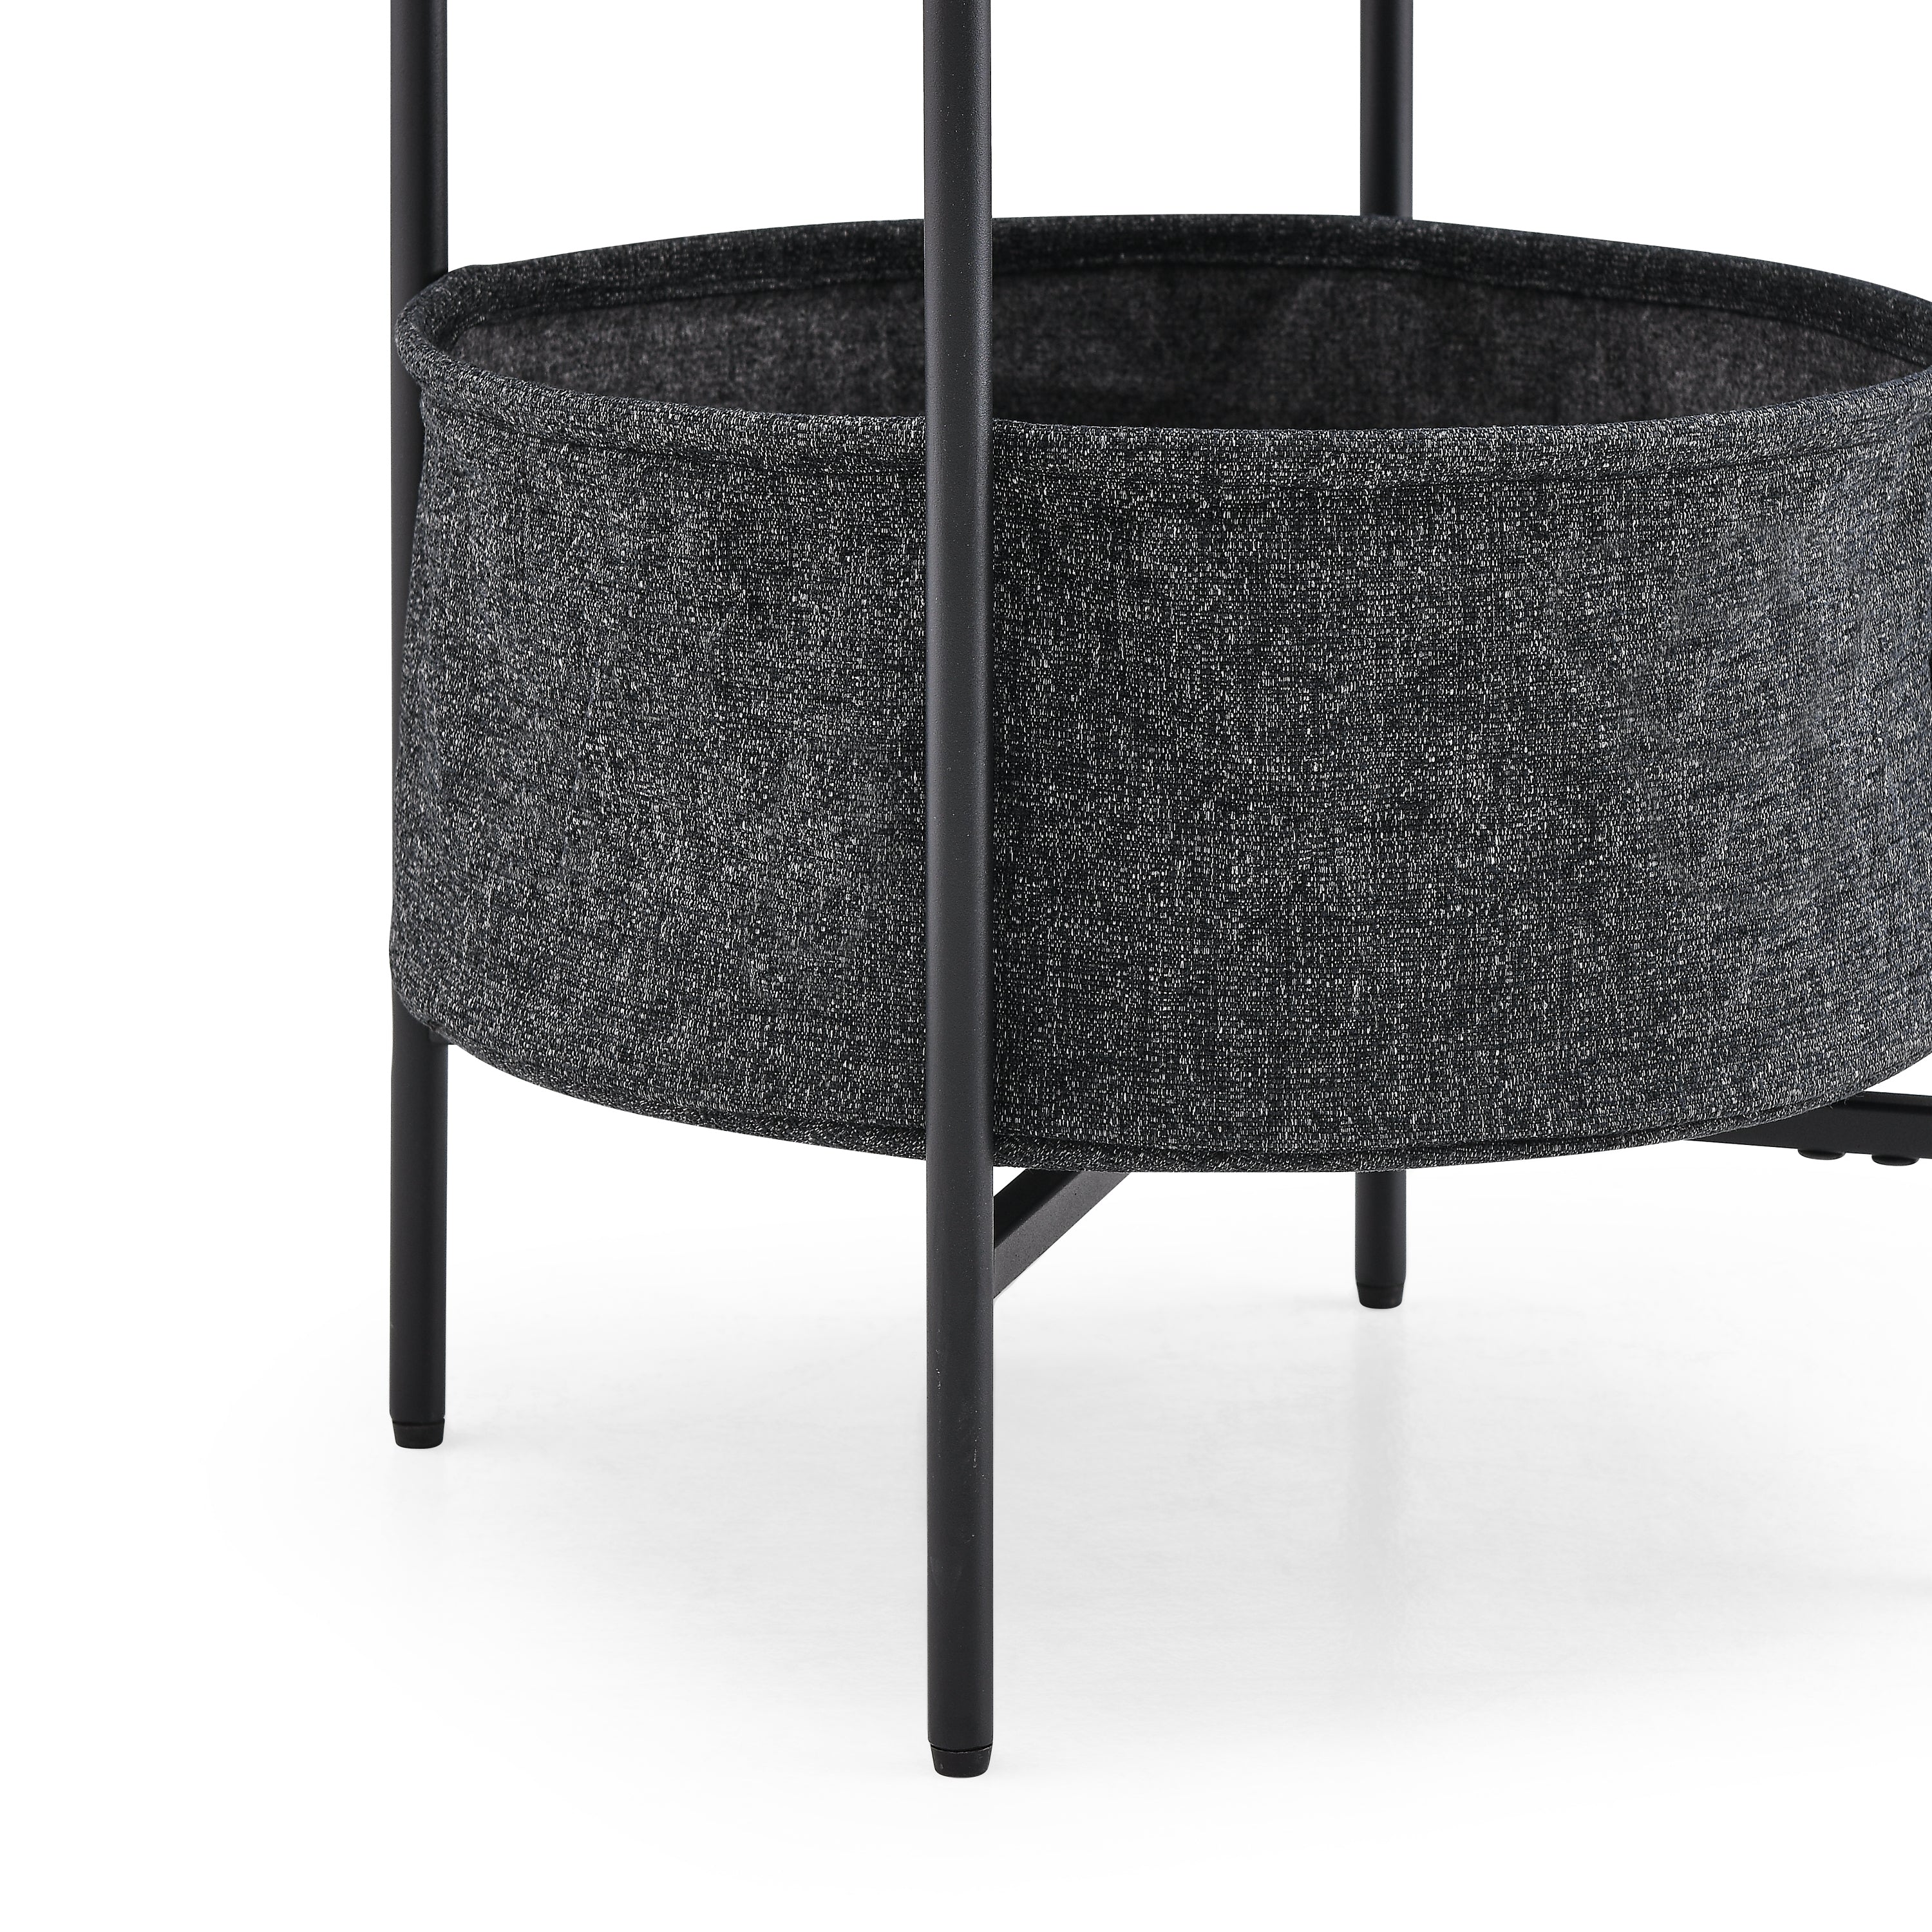 Modern Accent End Table with Storage Basket